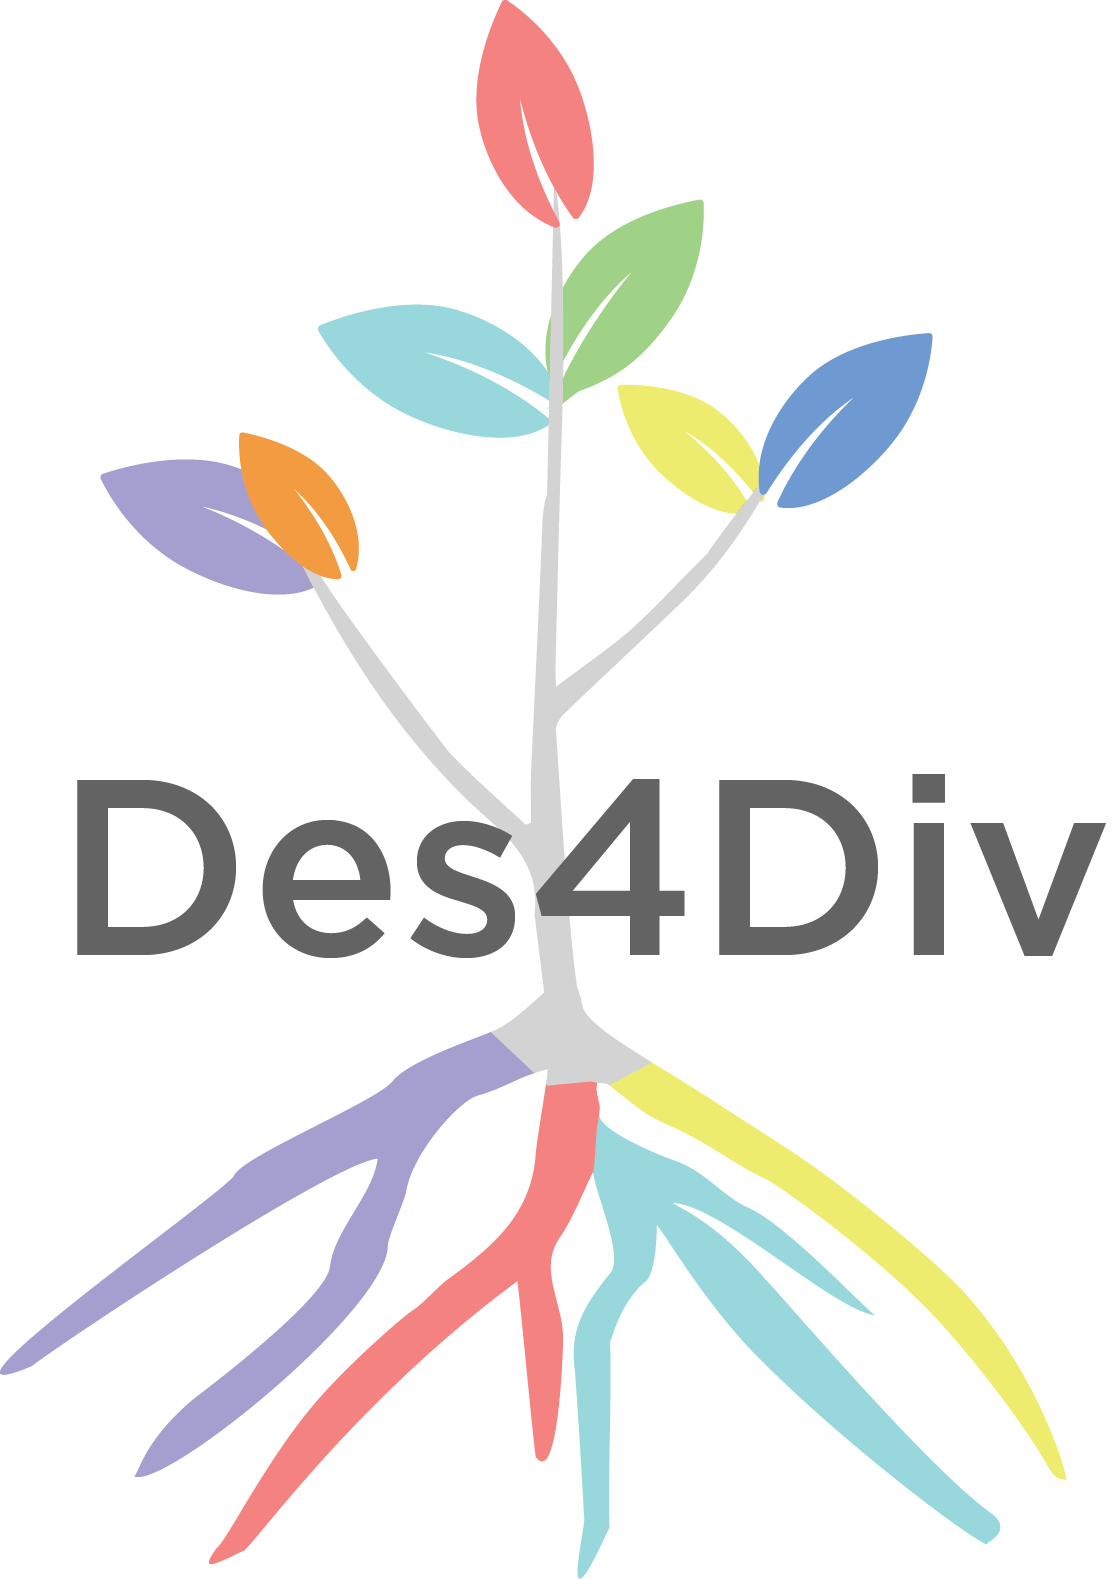 The Design for Diversity logo,
                               which is a multicolored tree with the words 'Des4Div' written across